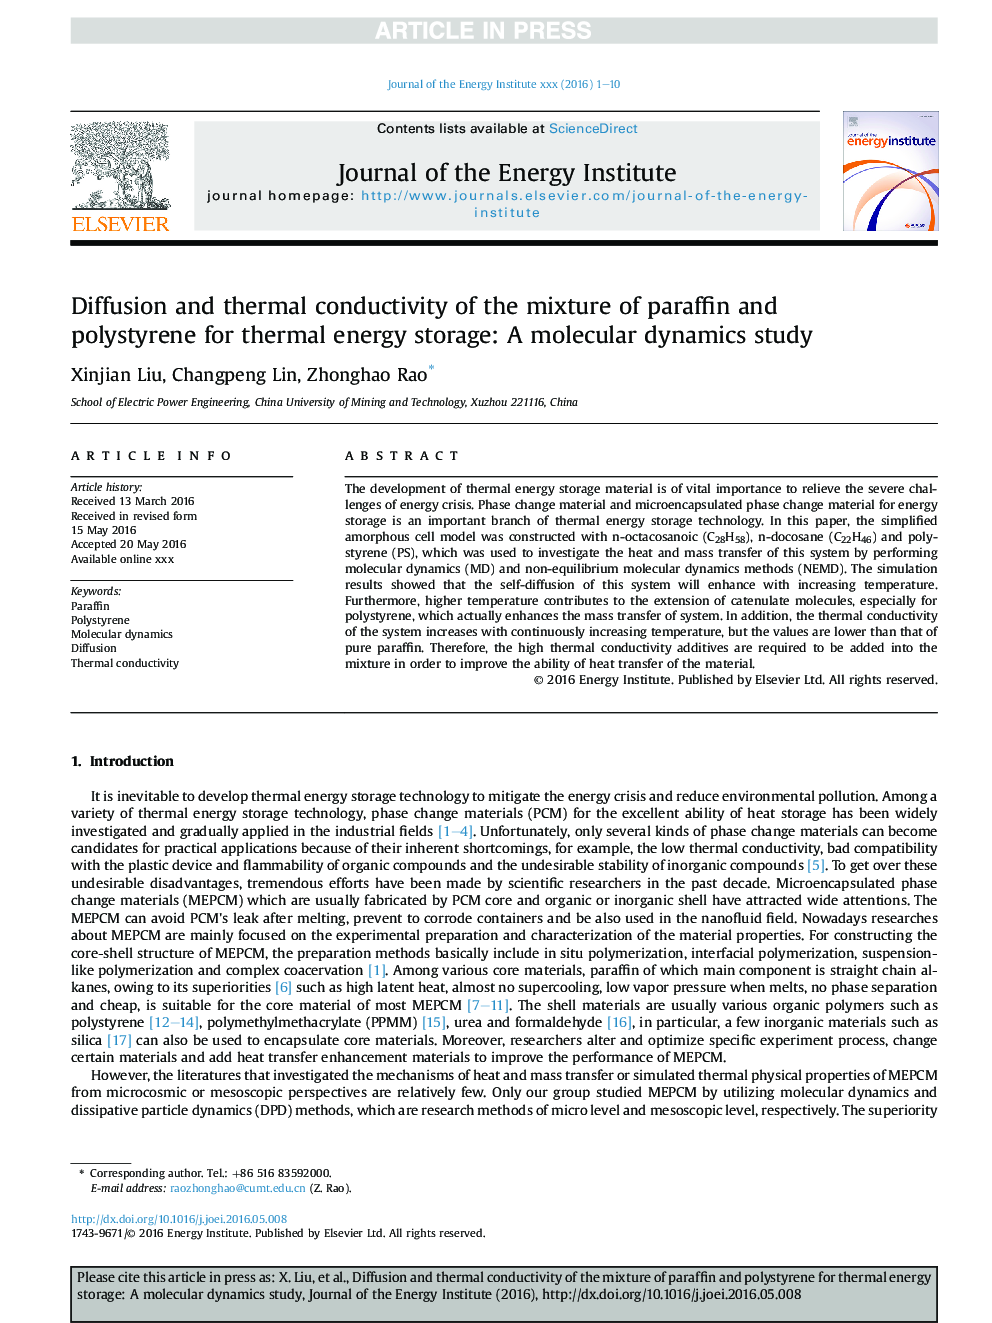 Diffusion and thermal conductivity of the mixture of paraffin and polystyrene for thermal energy storage: A molecular dynamics study